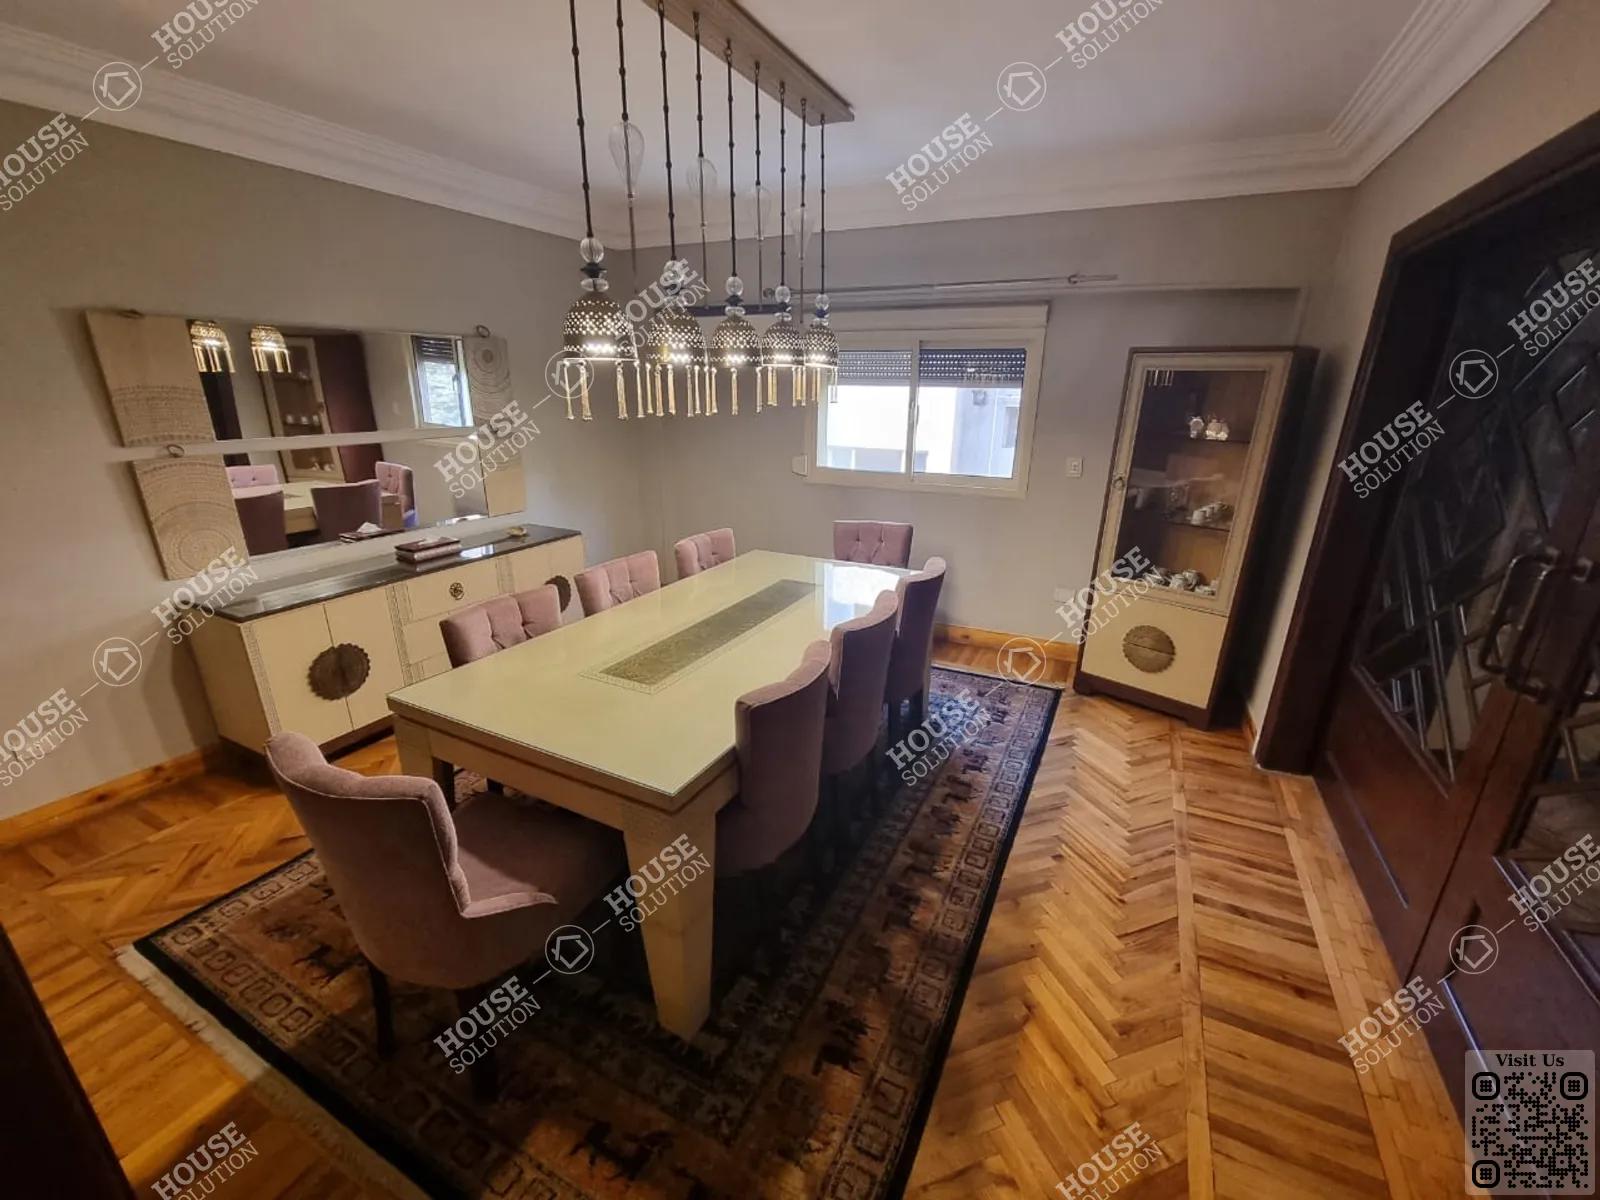 DINING AREA @ Apartments For Rent In Maadi Maadi Sarayat Area: 150 m² consists of 3 Bedrooms 2 Bathrooms Modern furnished 5 stars #5630-1